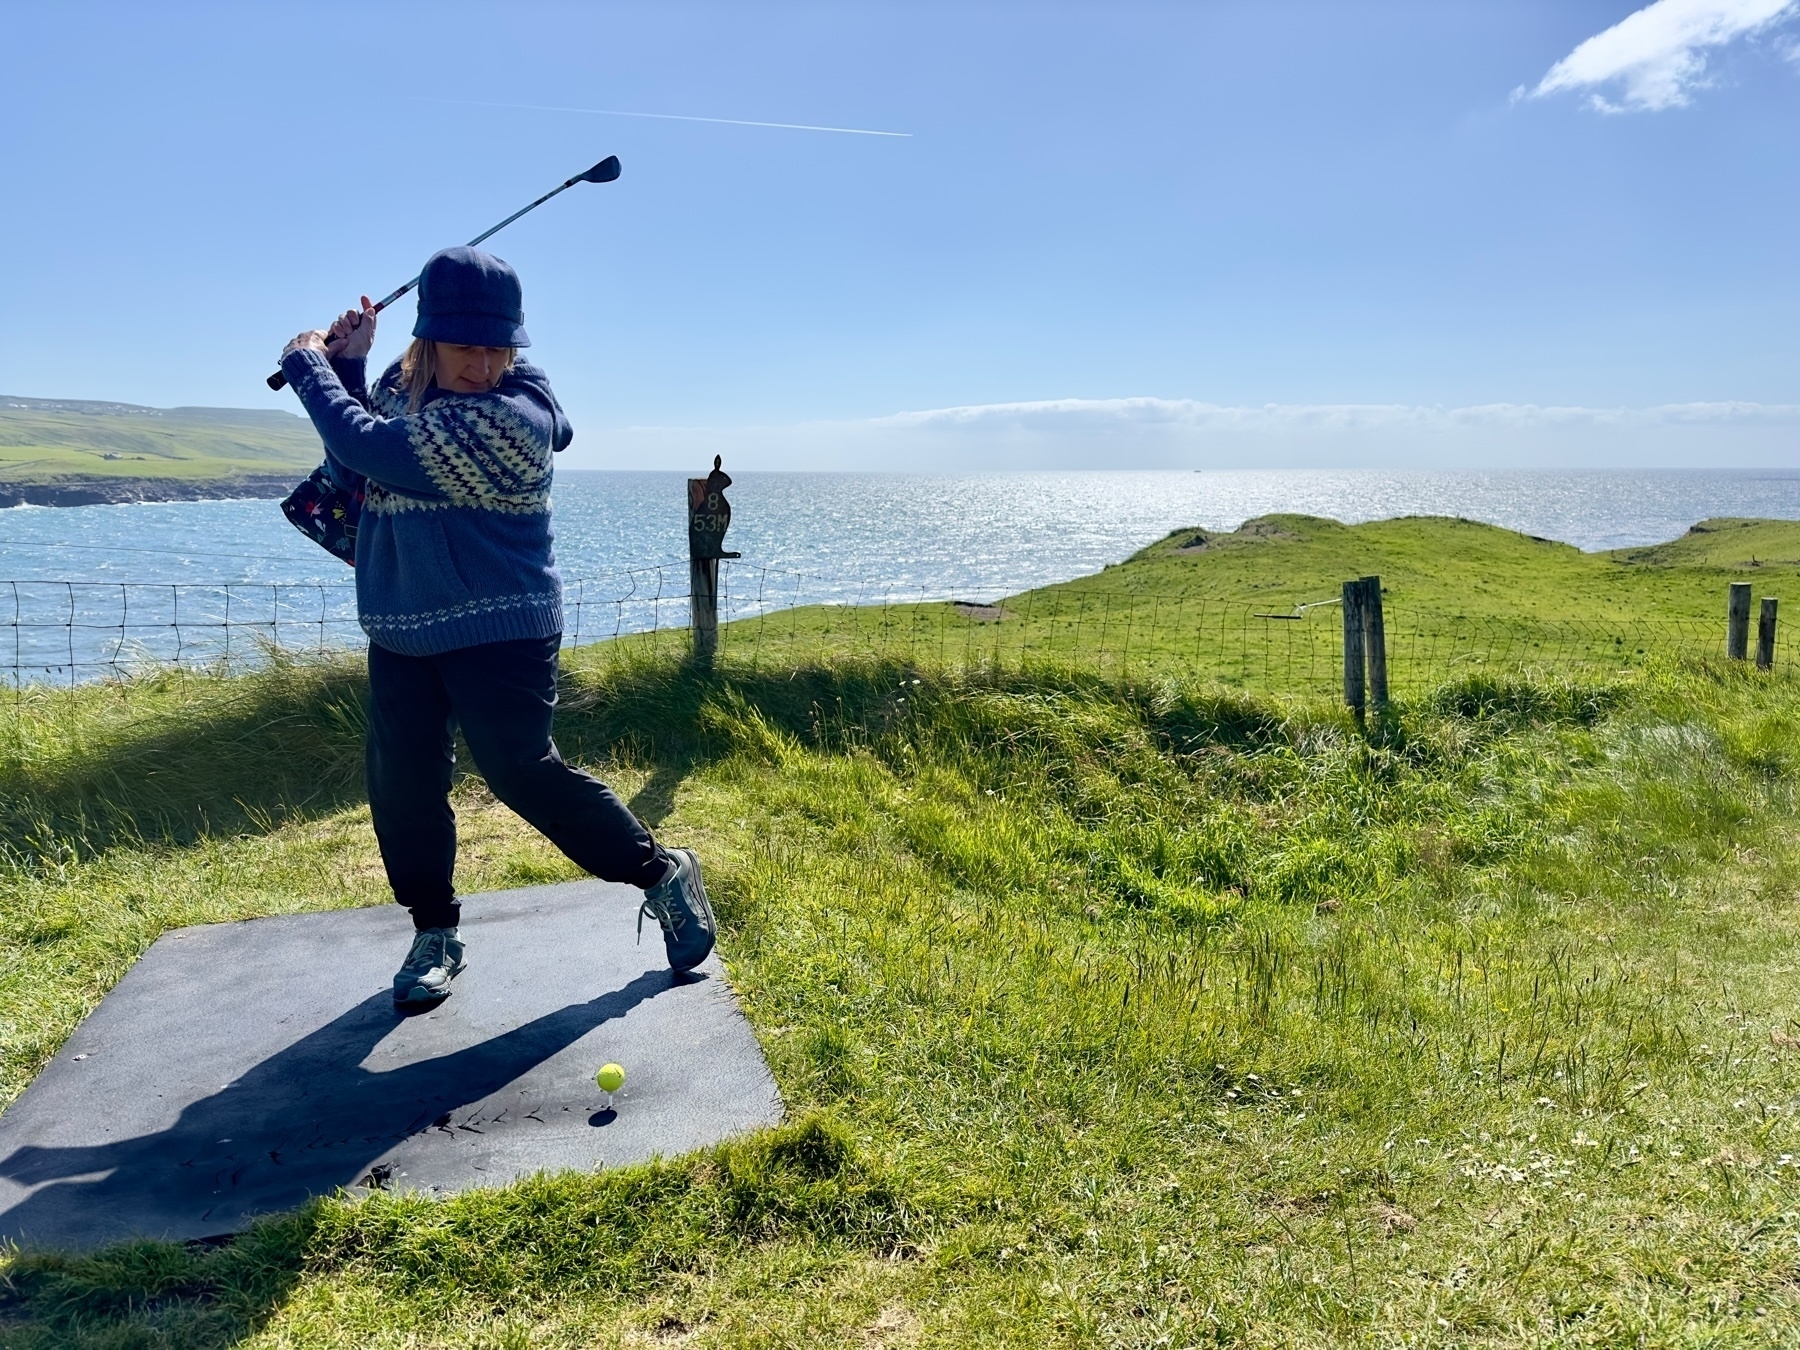 Auto-generated description: A person is swinging a golf club on a grassy coastal area with the ocean in the background.